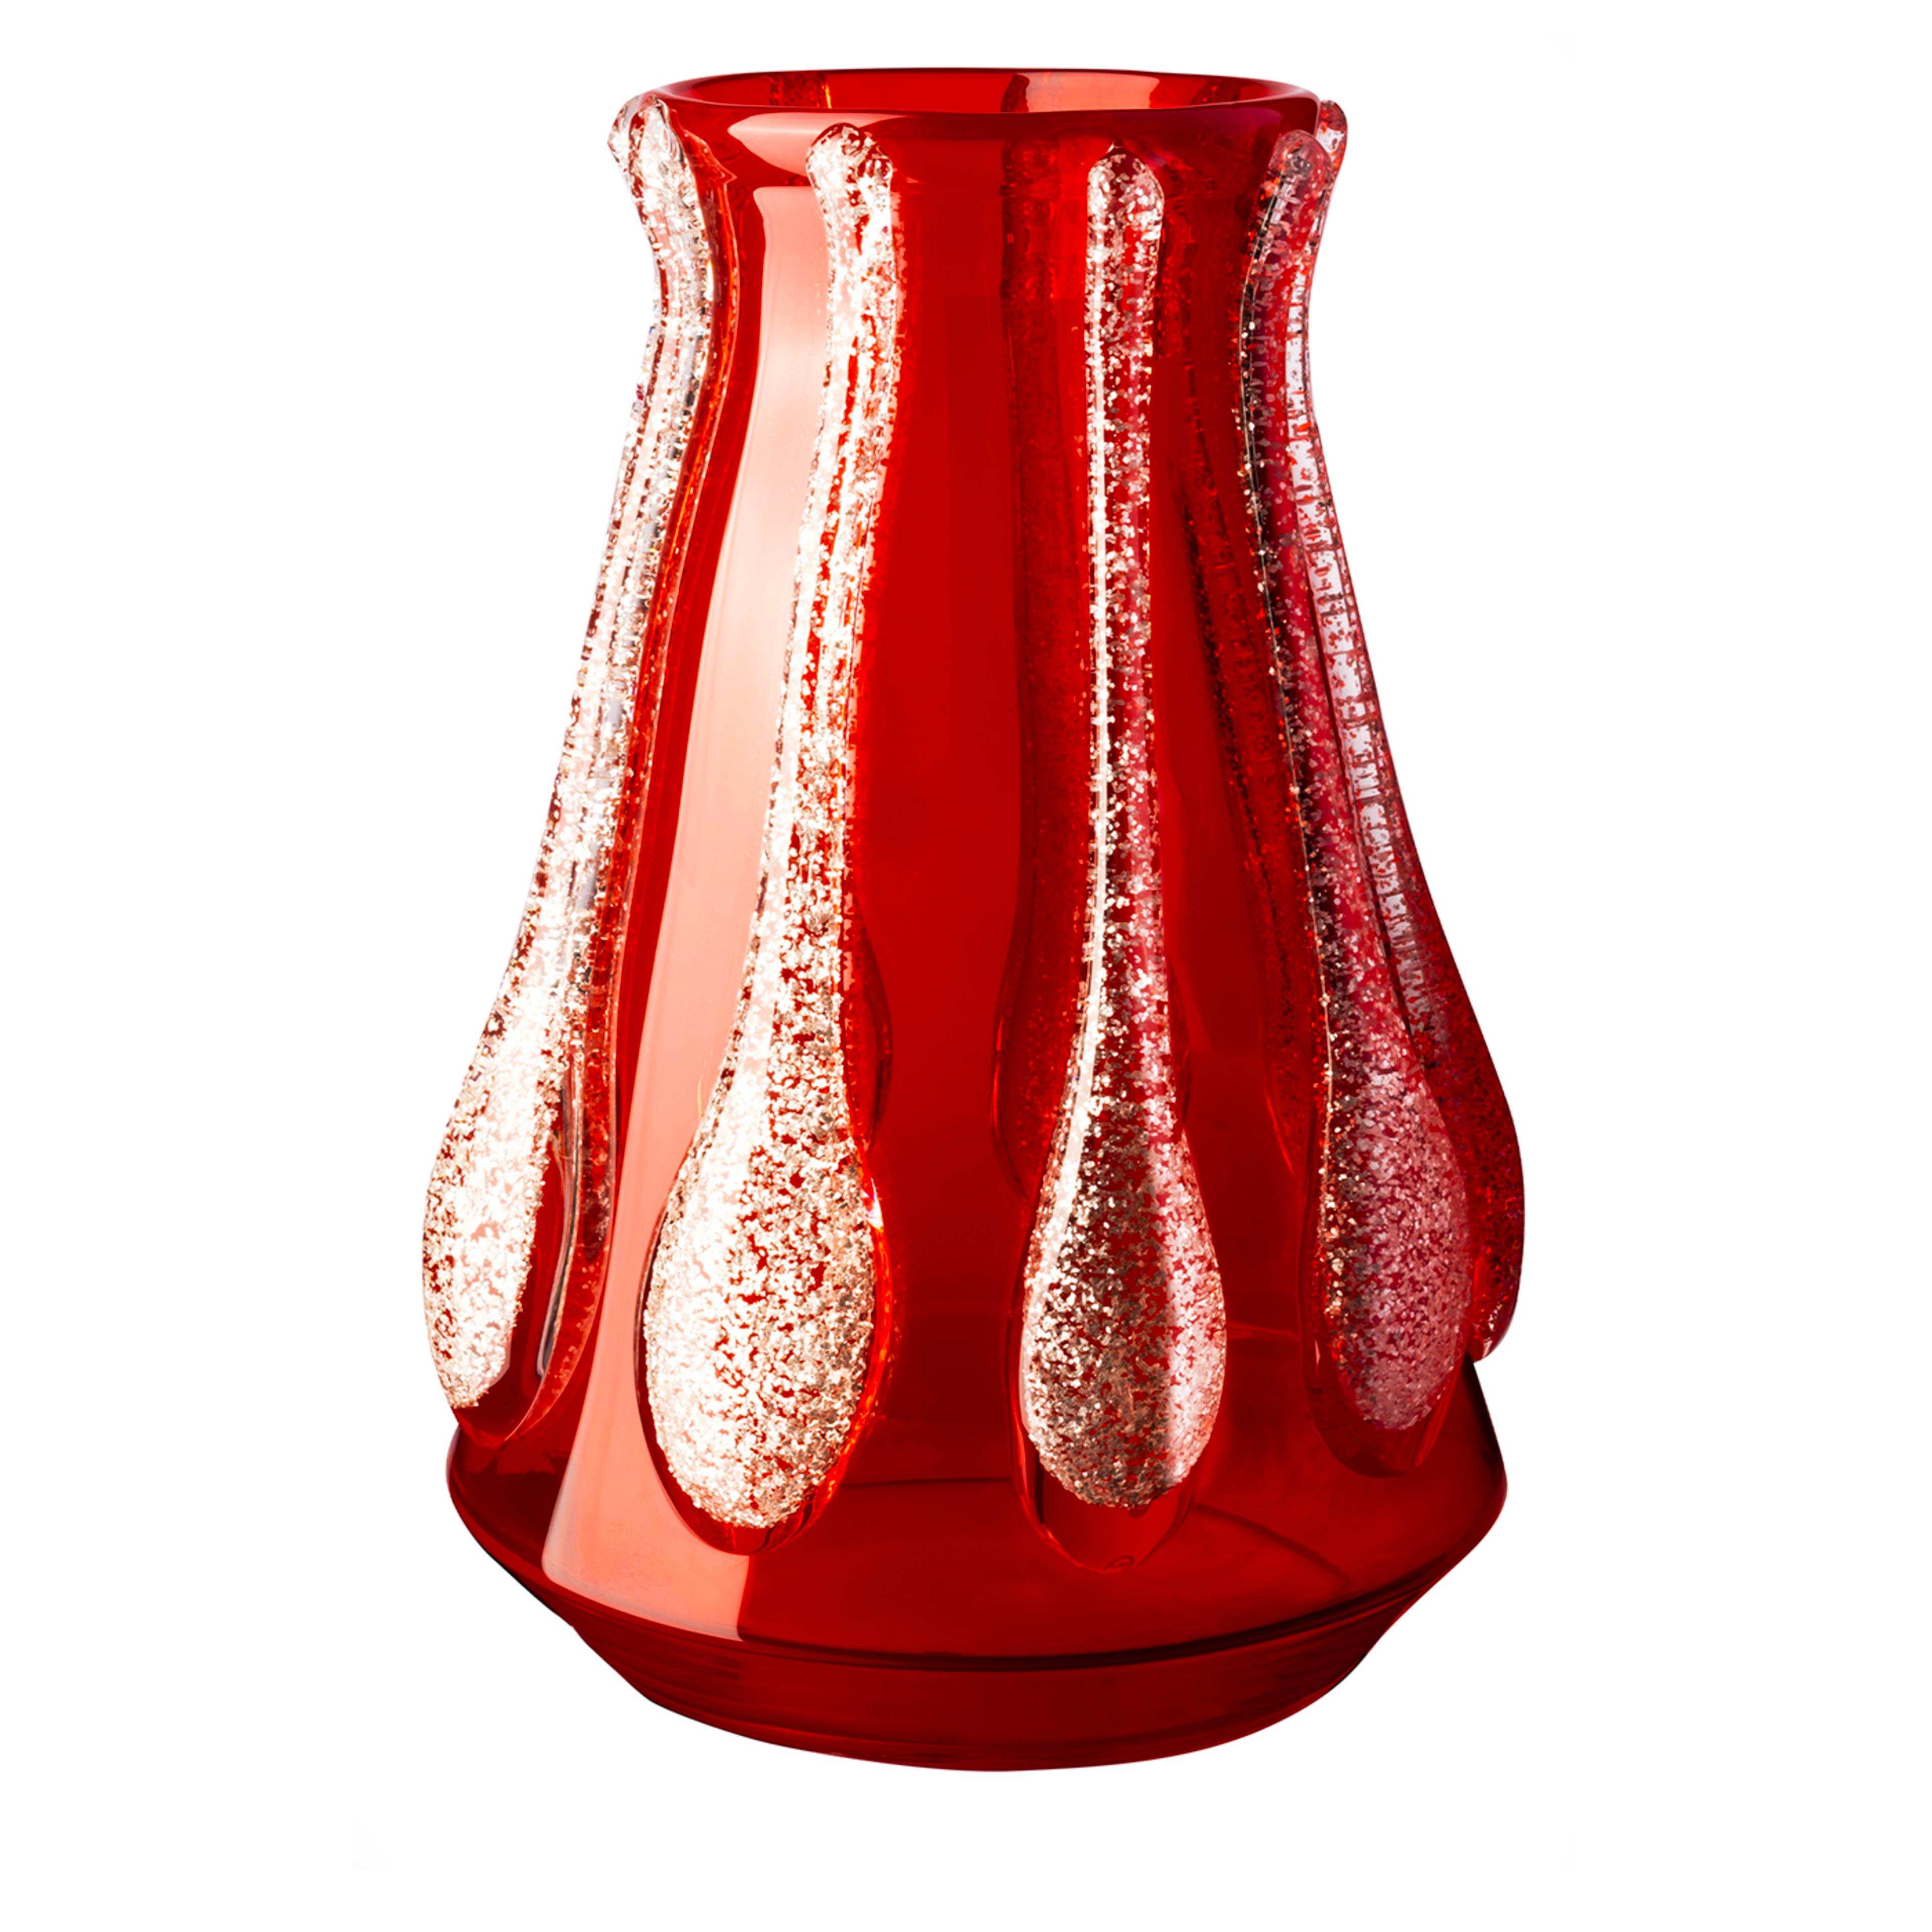 Distilling glamour while exemplifying glassblowing artistry, this vase mouth-blown of prized red Murano glass is a modern version of the iconic Colate Vase. A statement of eccentricity is made by the silvery glitters trapped in the casting-like